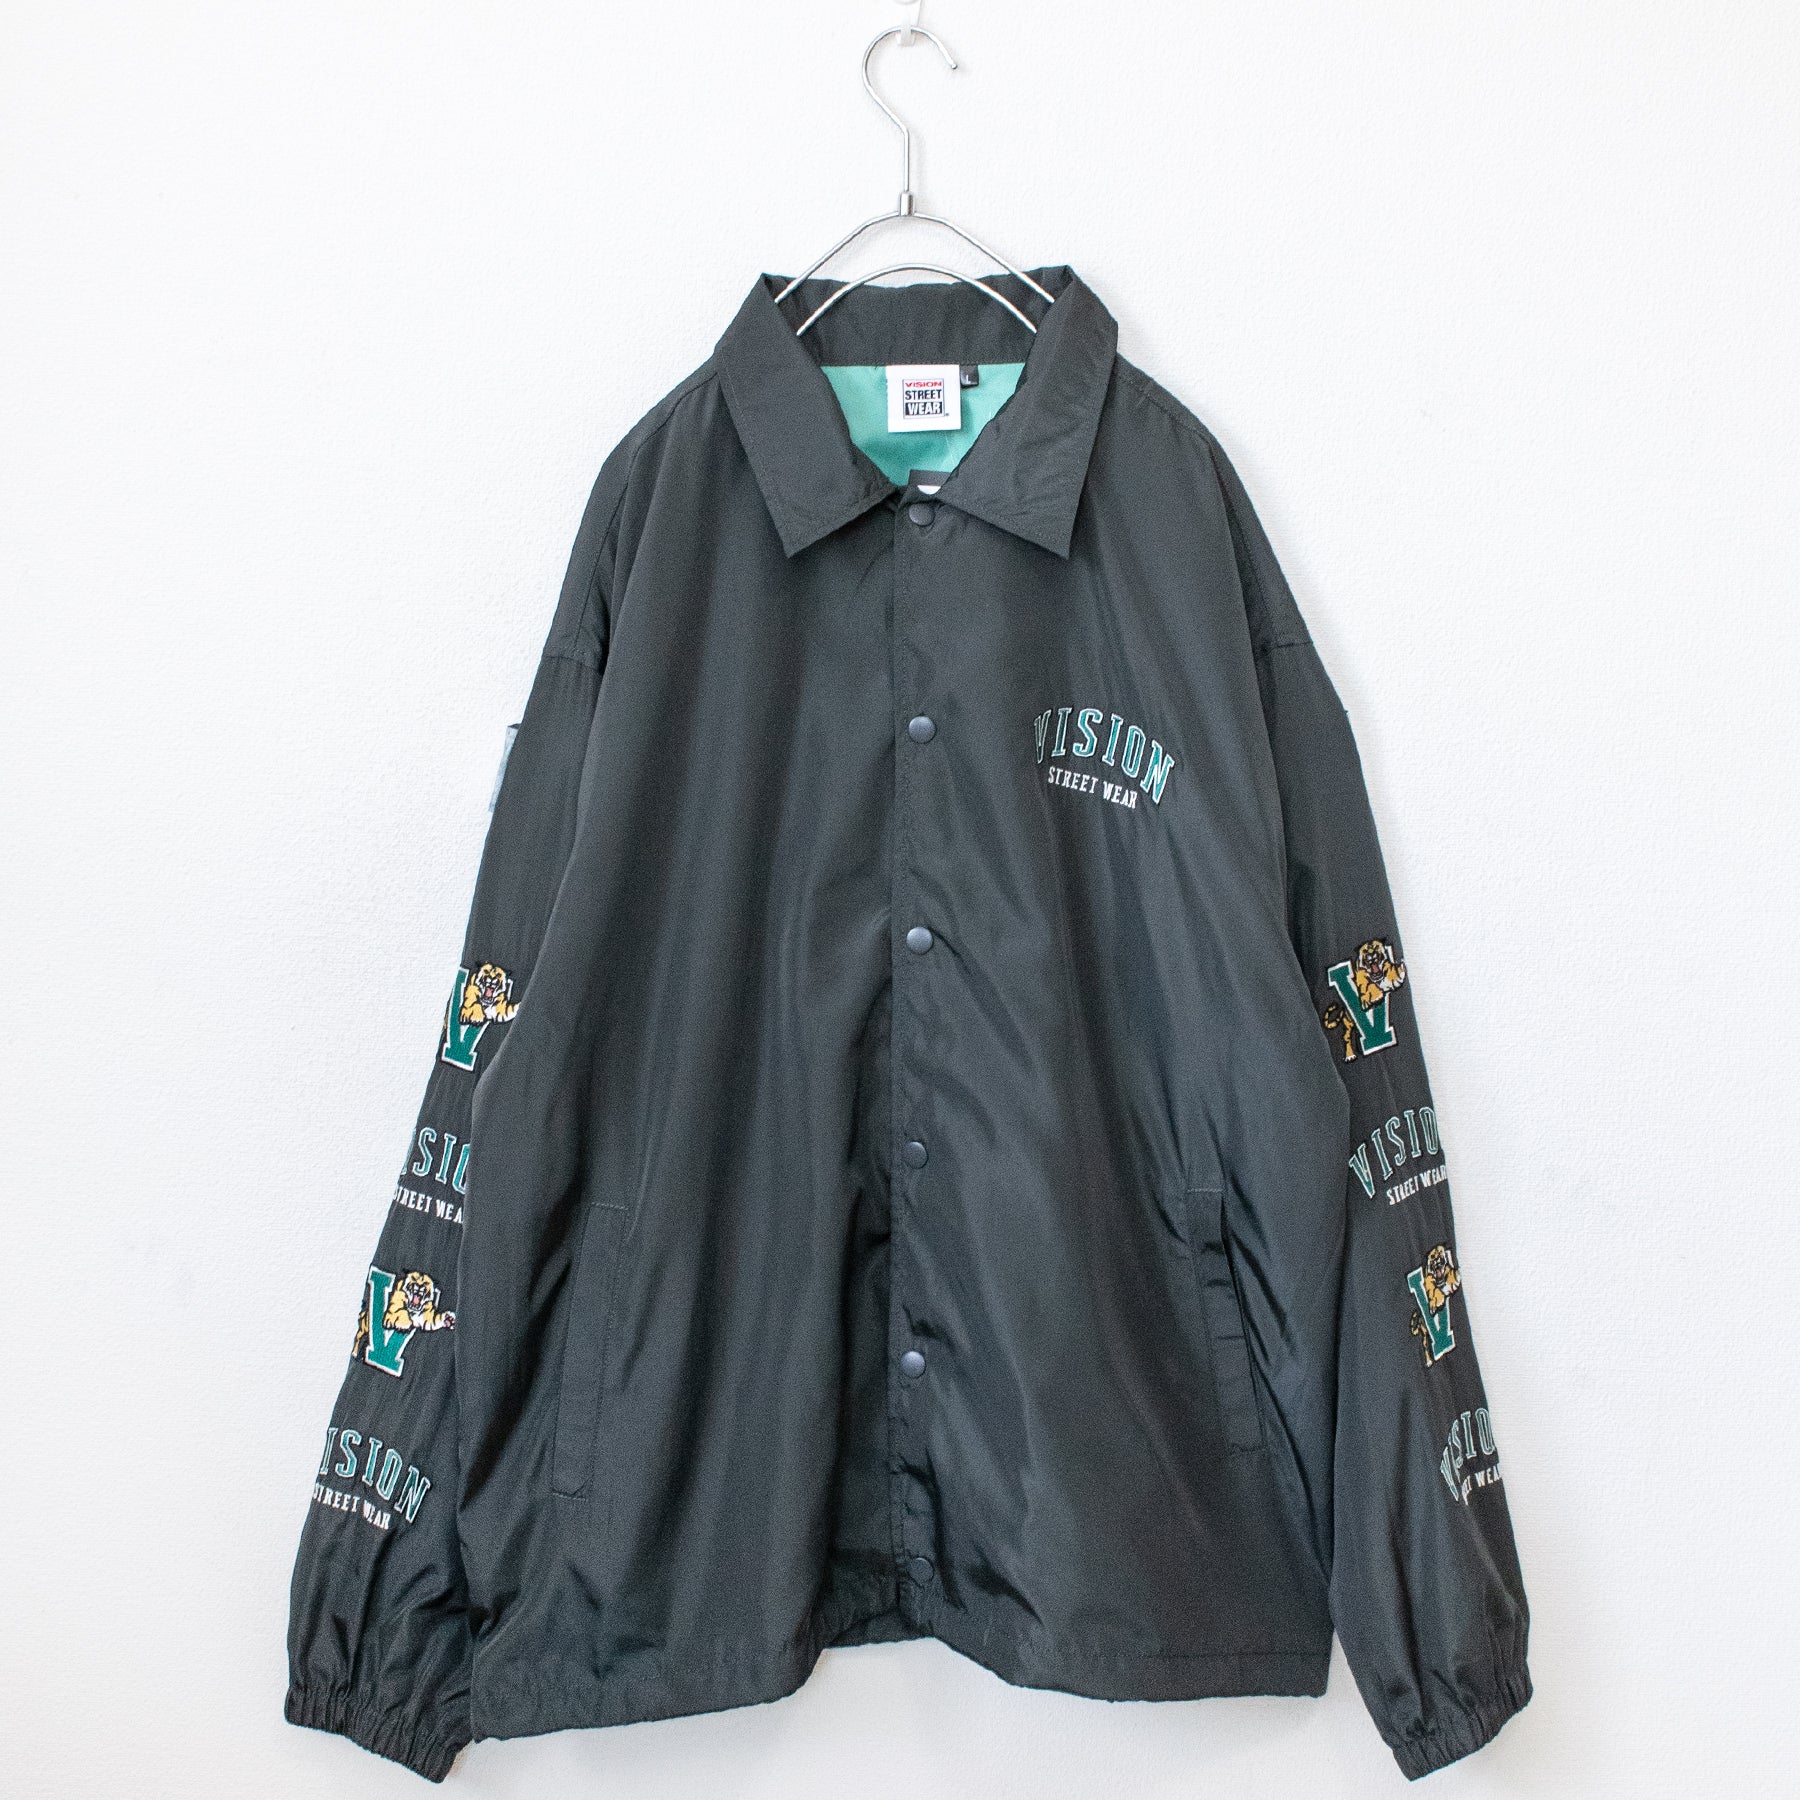 VISION STREET WEAR Embroidery Sleeve Coach Jacket